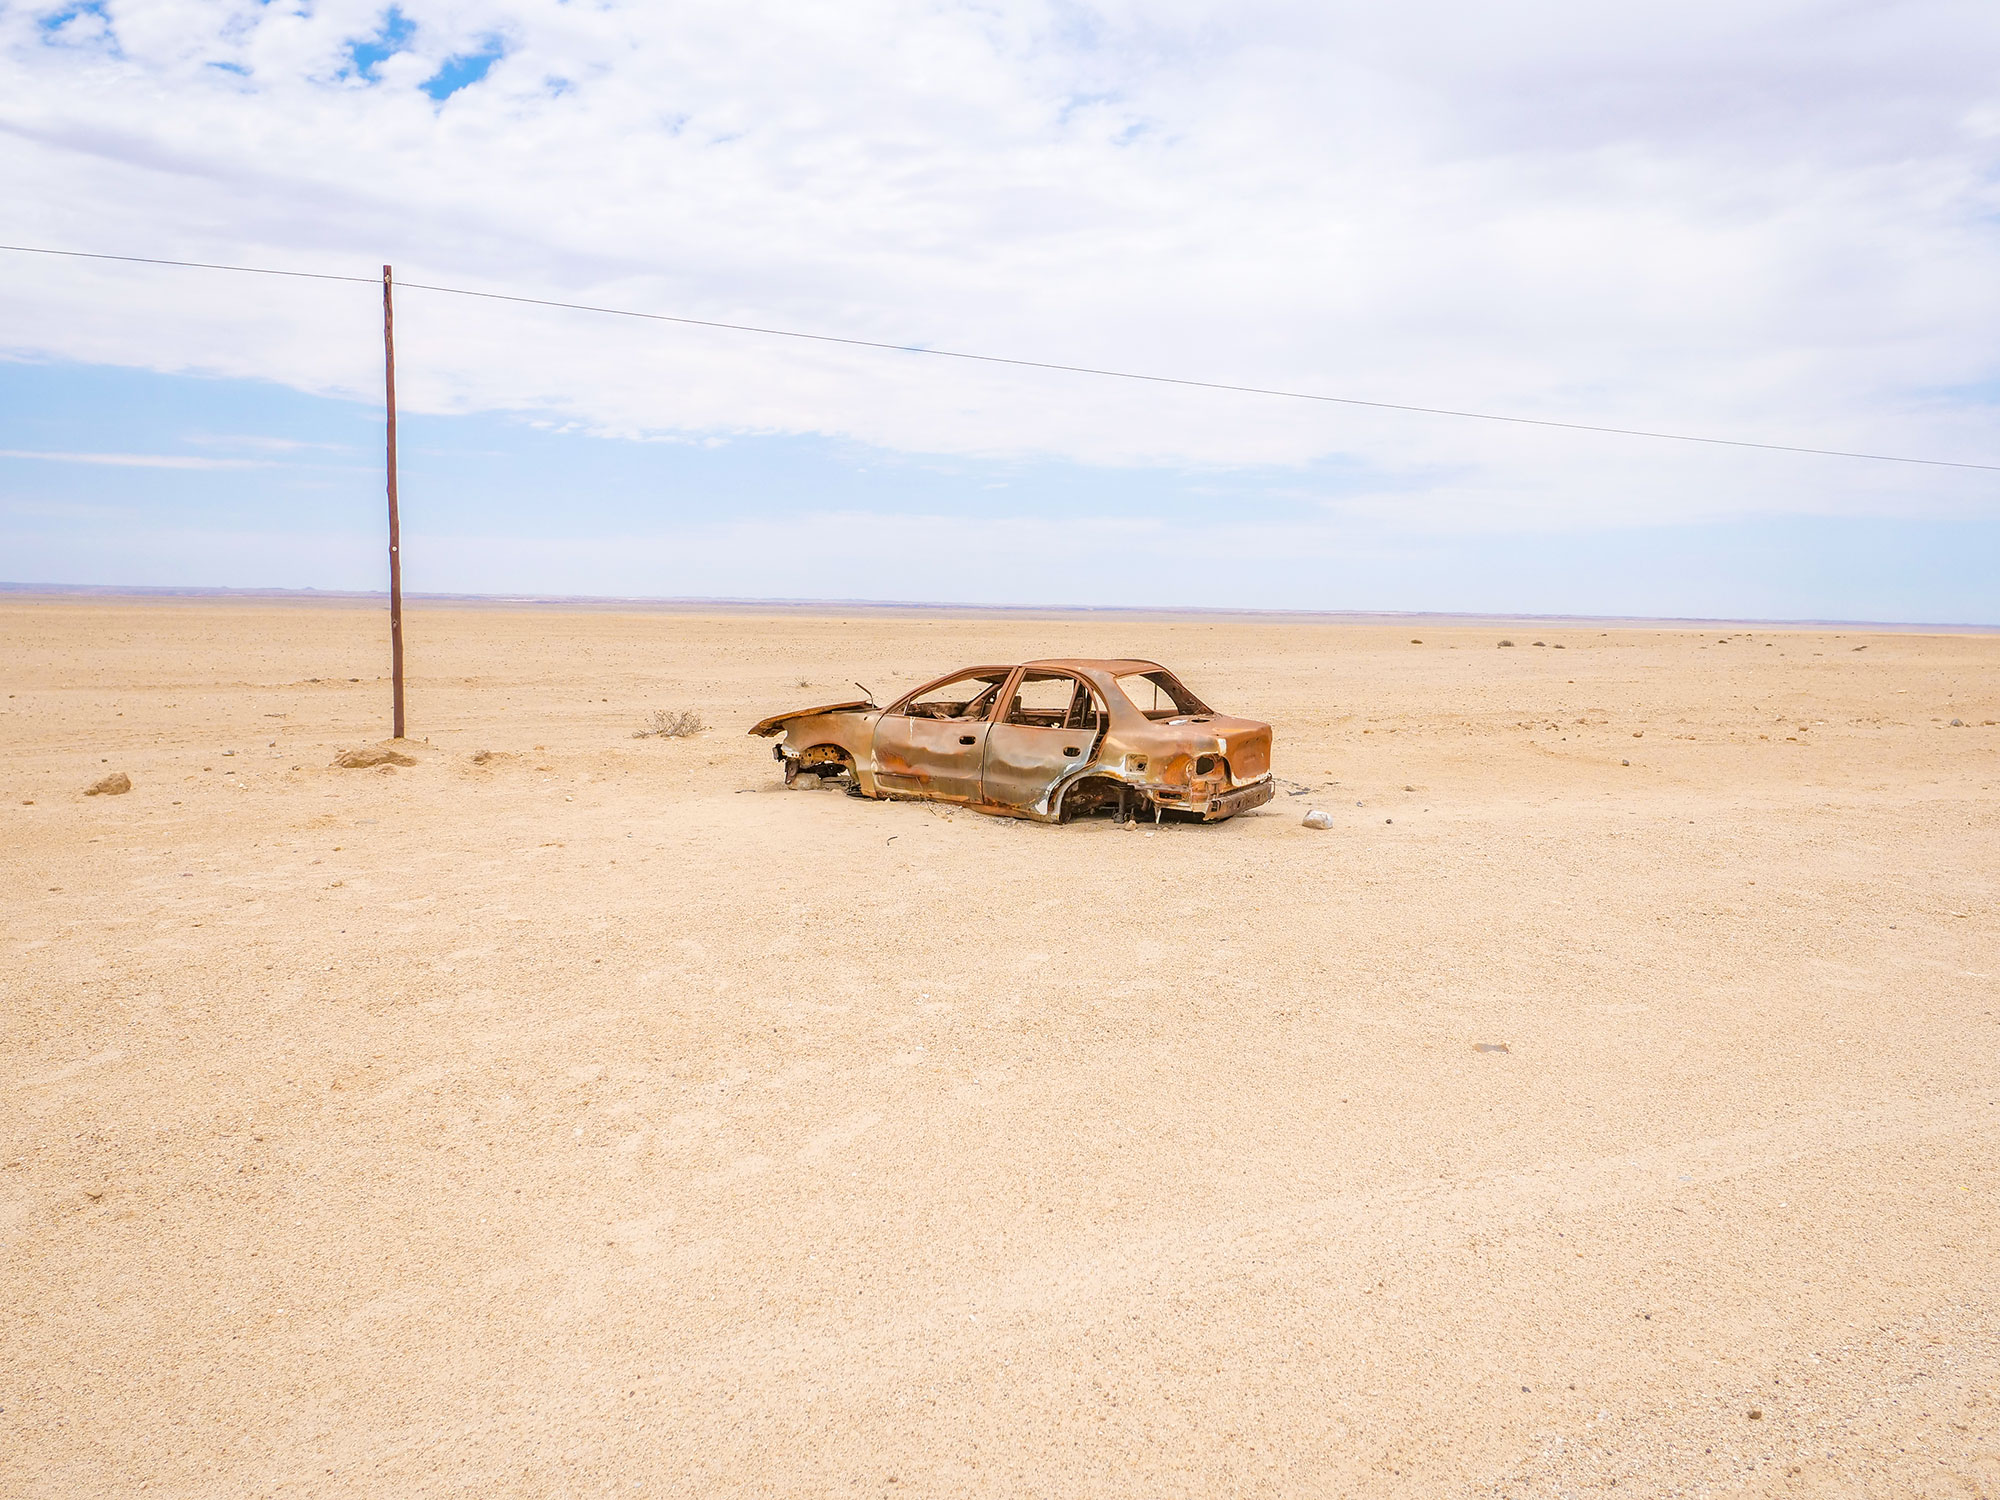 Rusted car wreck on self-drive through the desert in the Skeleton Coast, Namibia, Africa